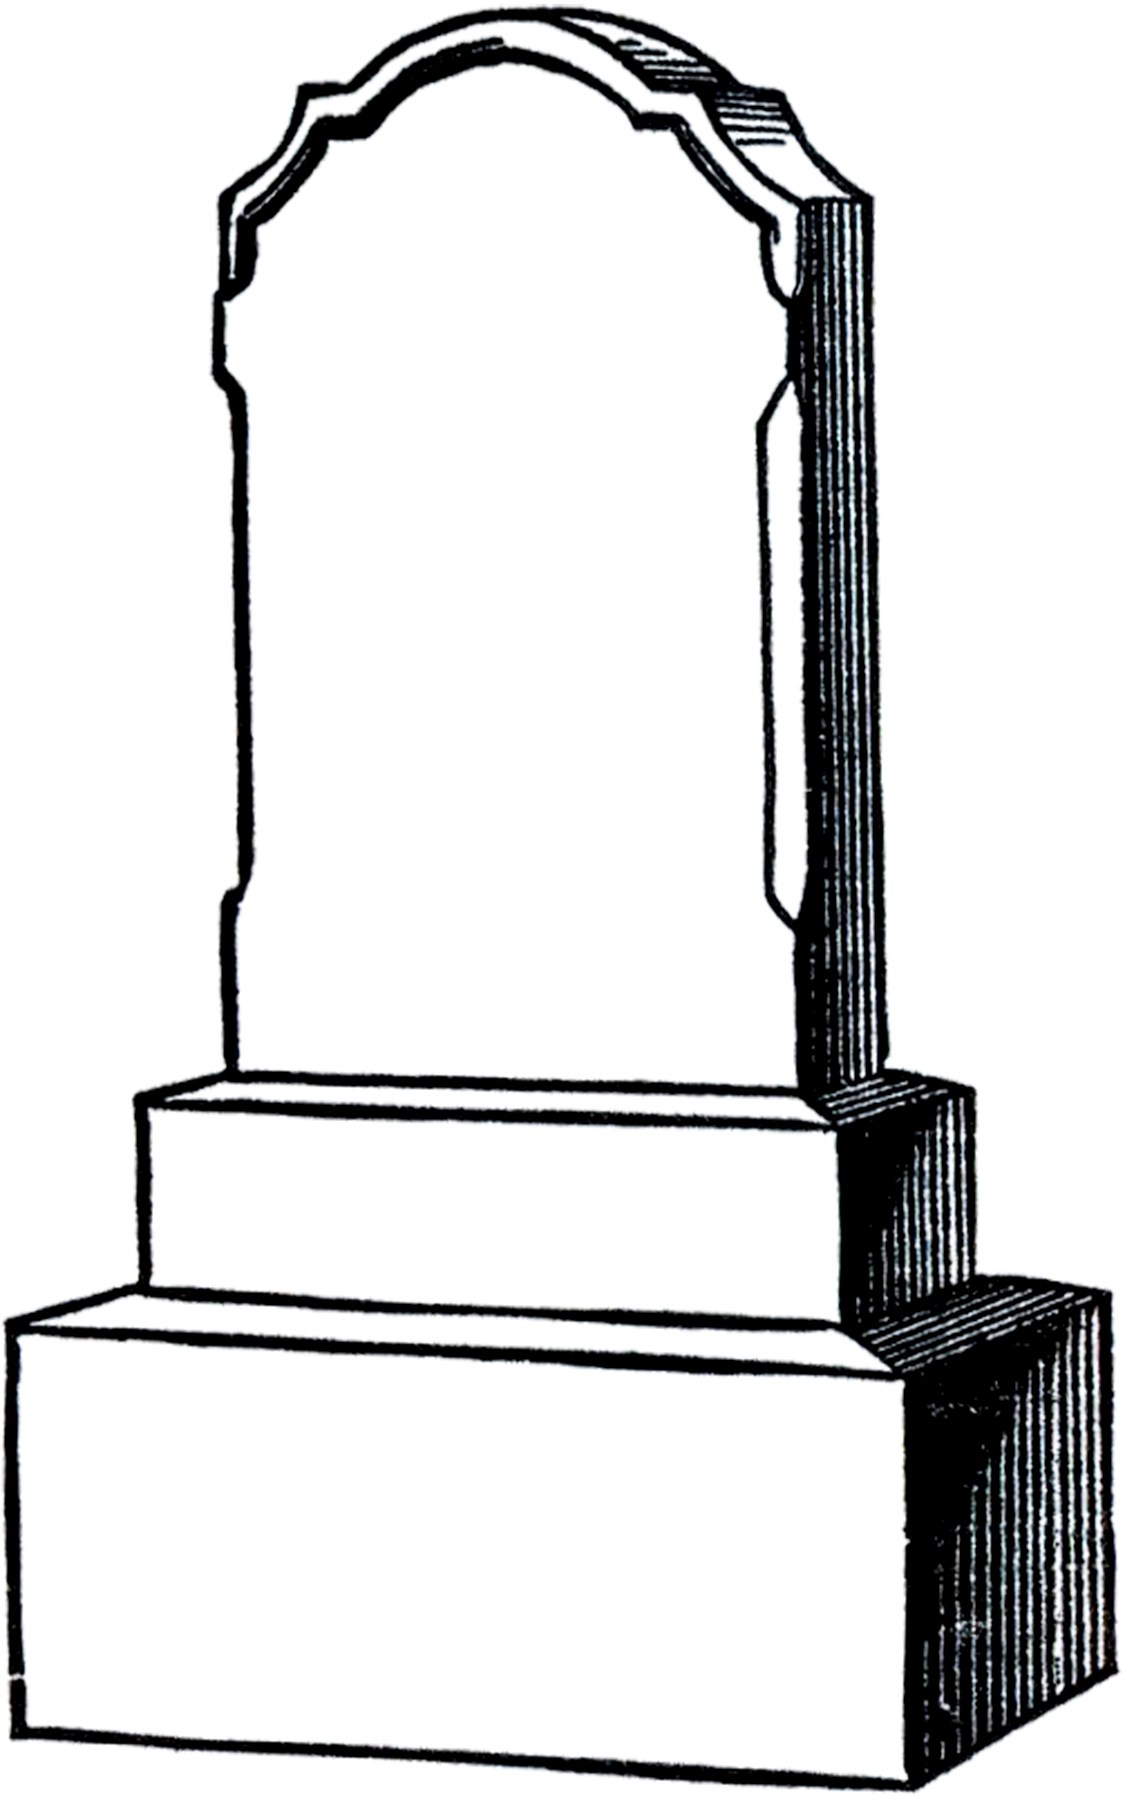 Tombstone clipart #4, Download drawings